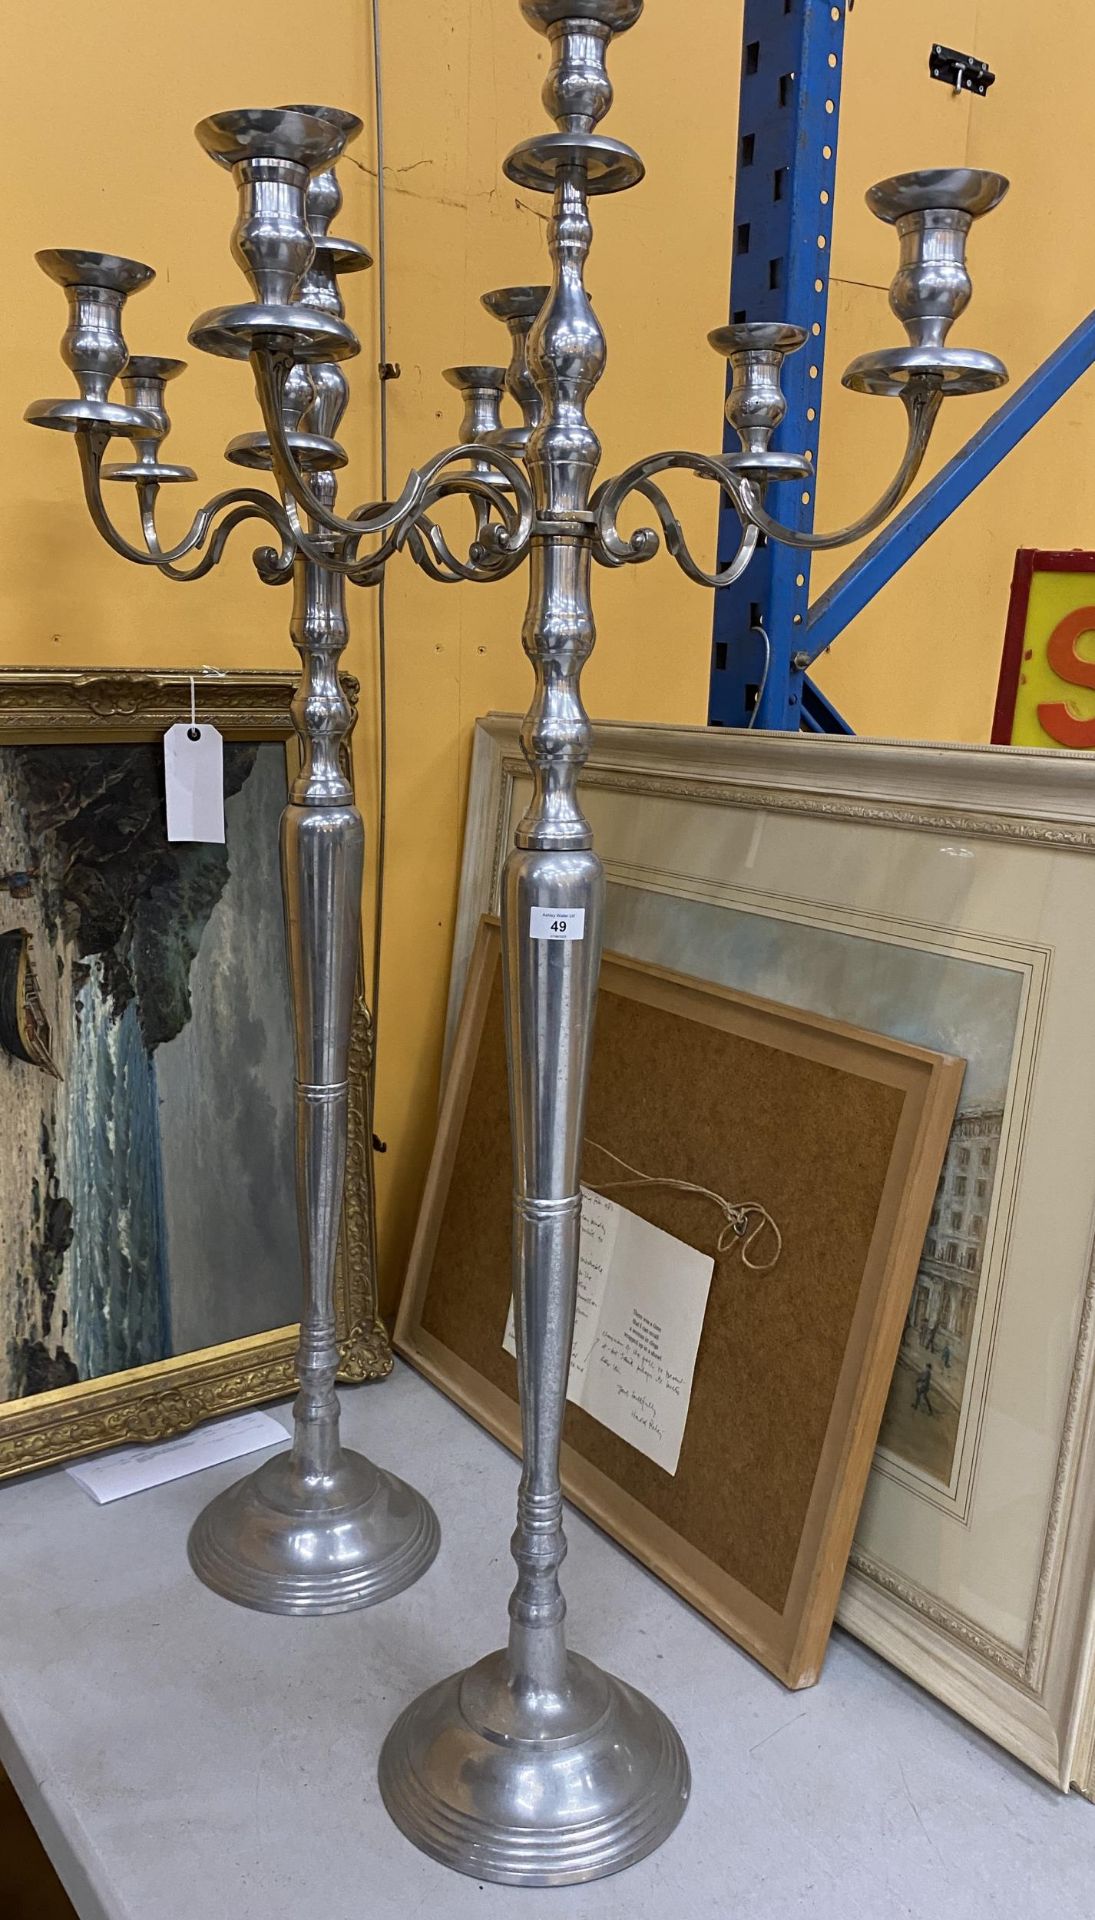 A LARGE PAIR OF CHROME EFFECT FLOOR STANDING CANDLEABRA